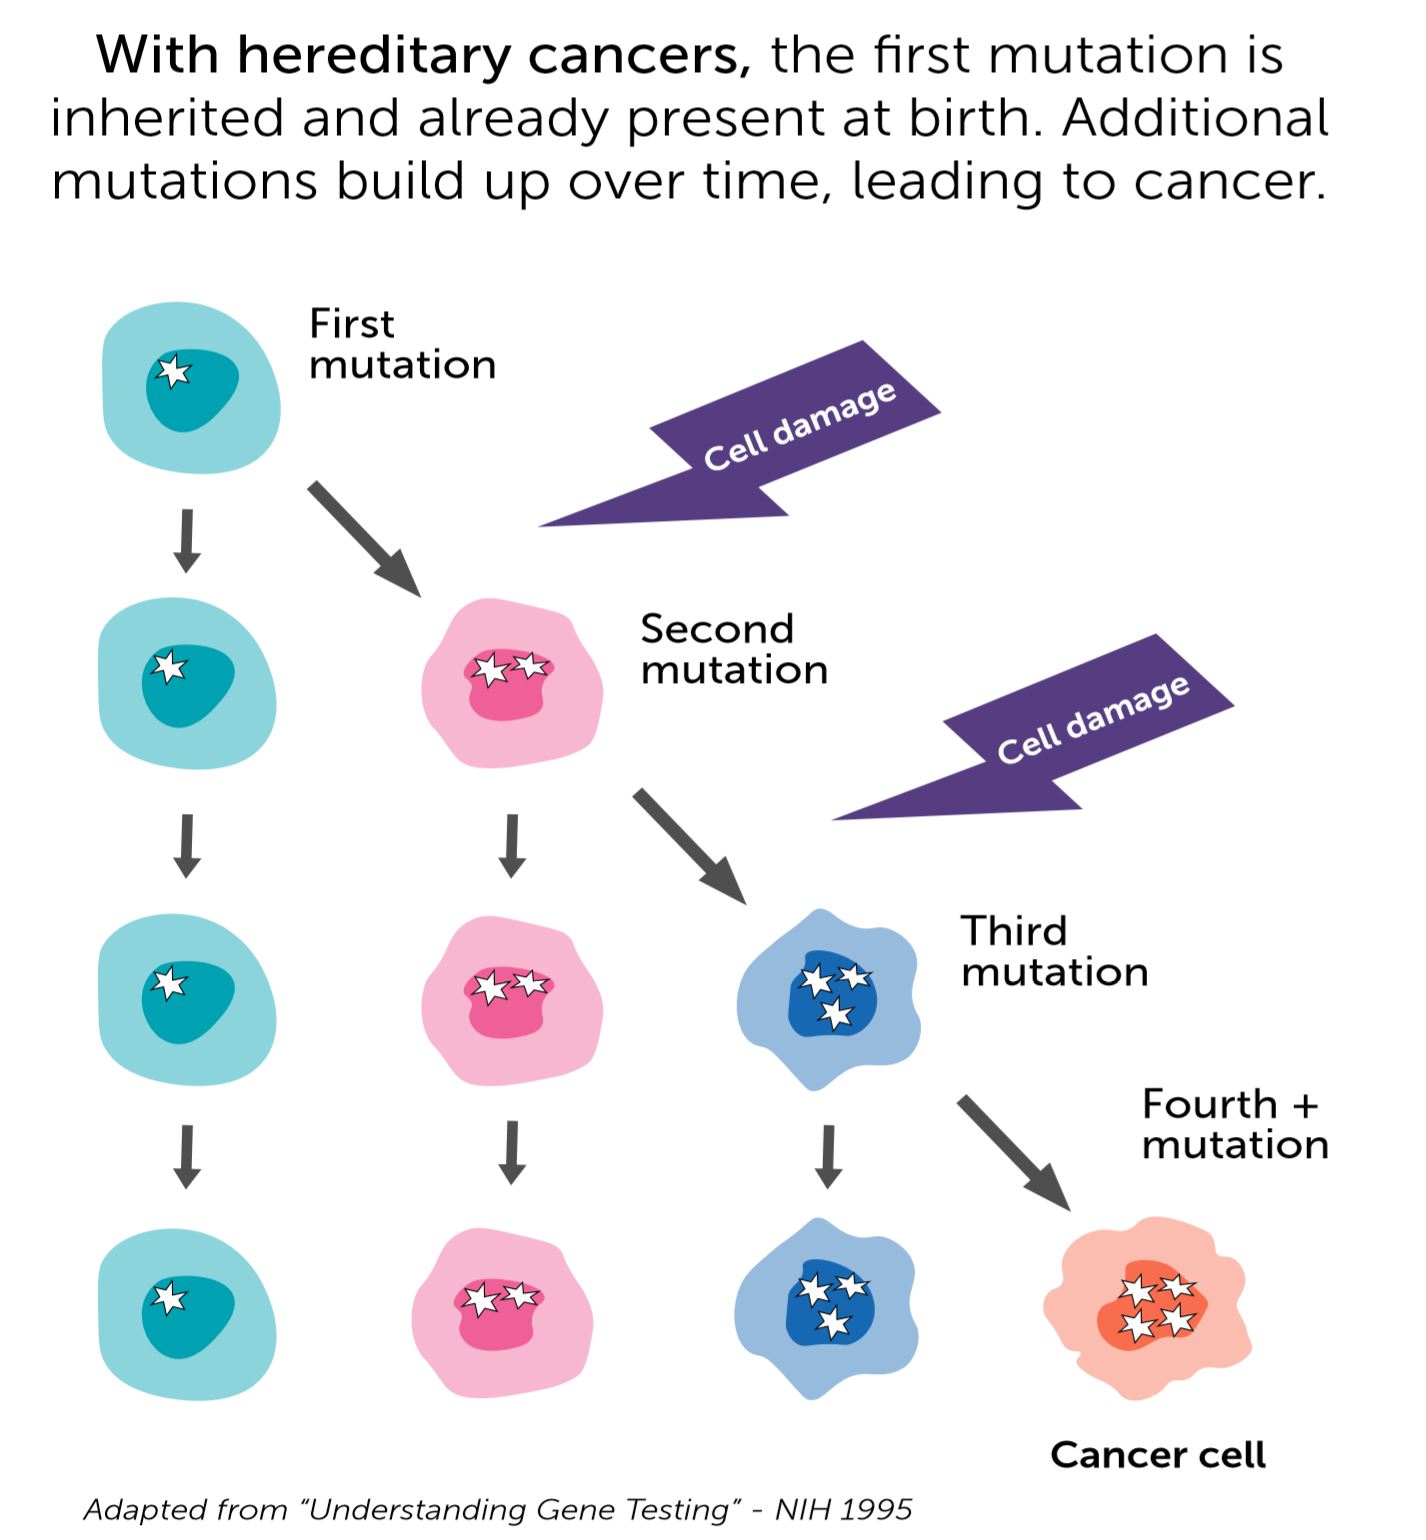 image of cell with <button
                x-data
                class='glossary-tip tt-inherited-mutation'
                x-tooltip='<p>Inherited mutations are mutations that can be passed down from parents to their children. Inherited mutations in BRCA1, BRCA2 or the Lynch syndrome genes are associated with a very high risk for cancer and can cause cancer to run in families.&nbsp;</p>'
            >inherited mutation</button> becoming a cancer cell